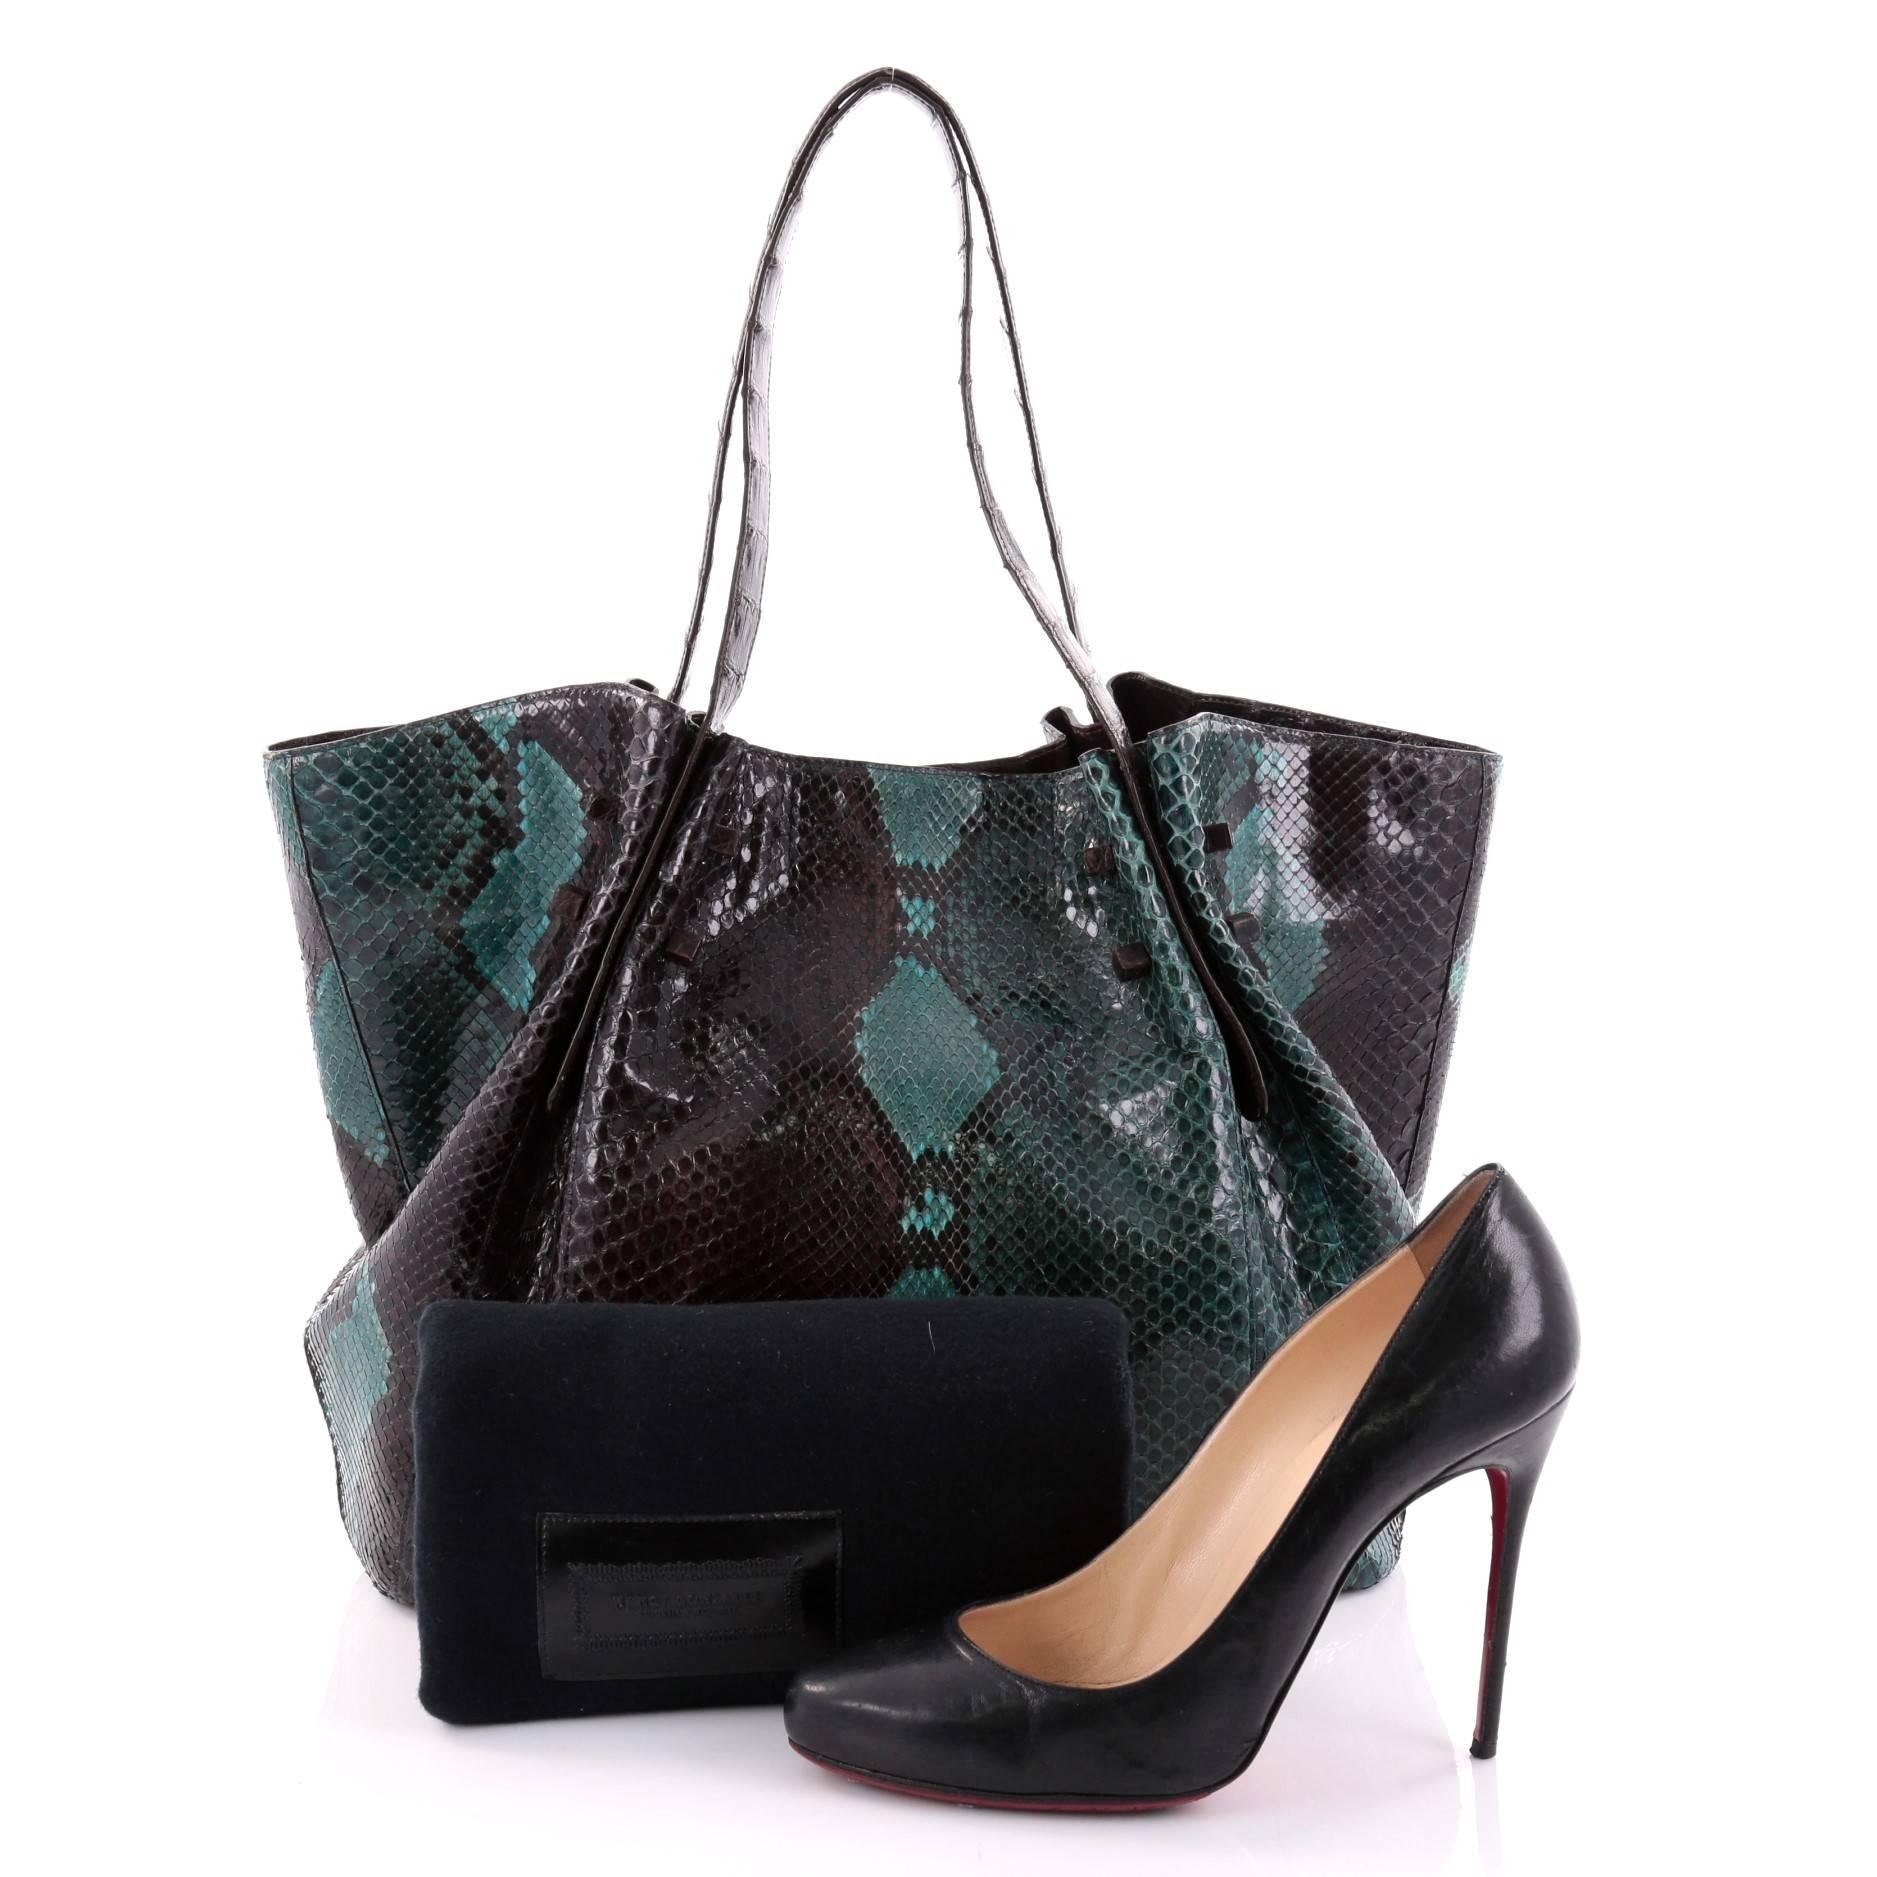 This authentic Nancy Gonzalez Pleated Tote Python with Crocodile Large is the perfect combination of luxurious style and polished aesthetic made for the modern woman. Crafted from genuine dark brown and teal python and dark brown crocodile skin,